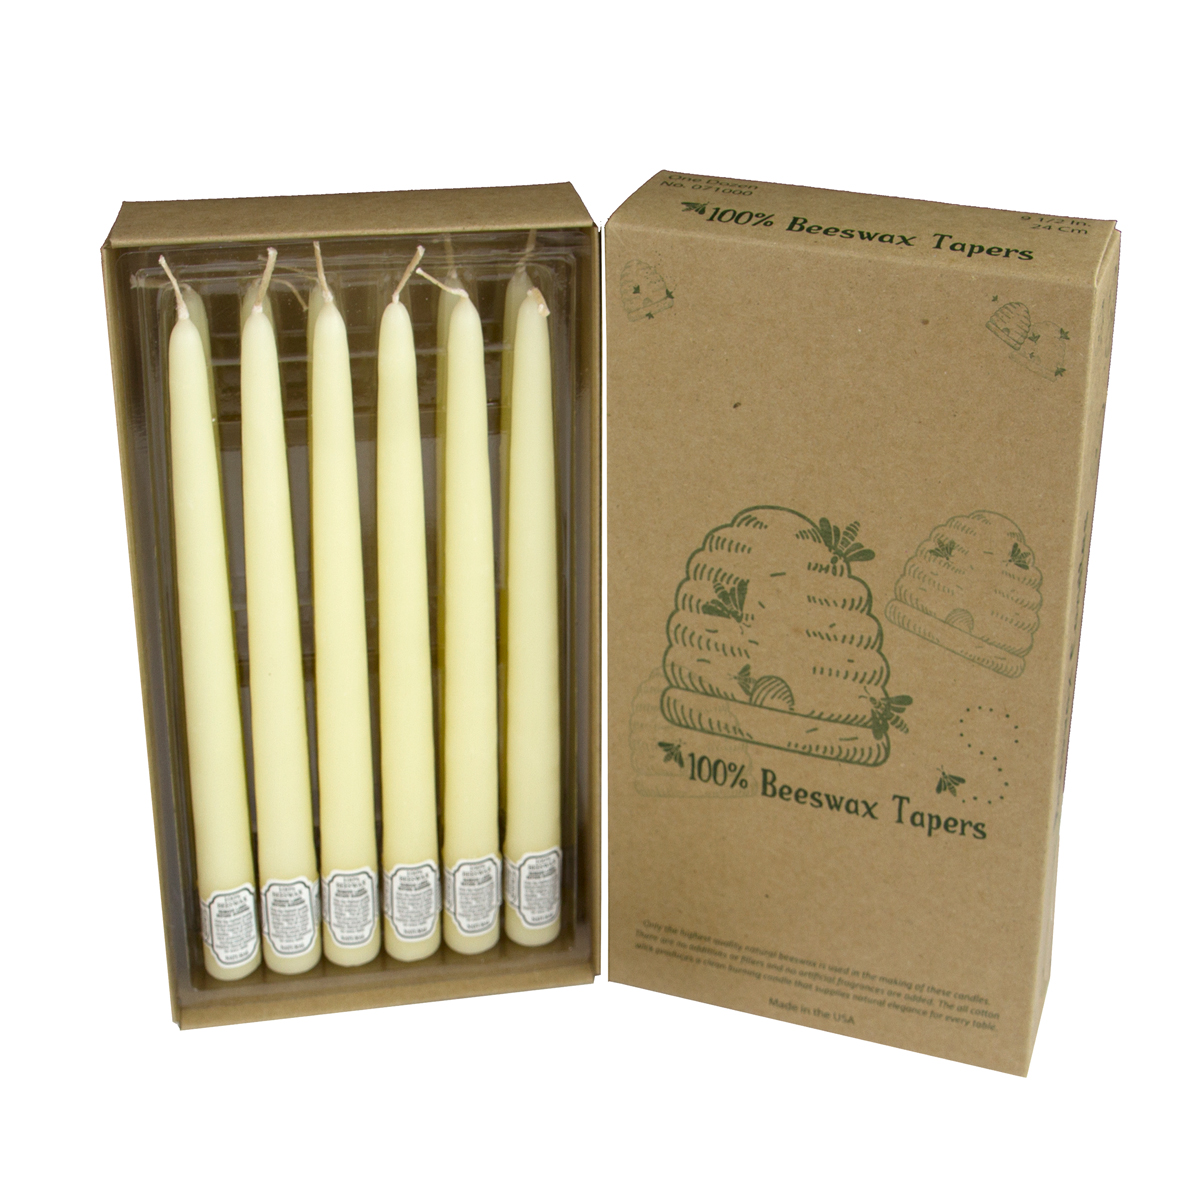 7.5 Inch Tall 100% Beeswax Tapers Candles 3/4 Inch Diameter Set of 2 